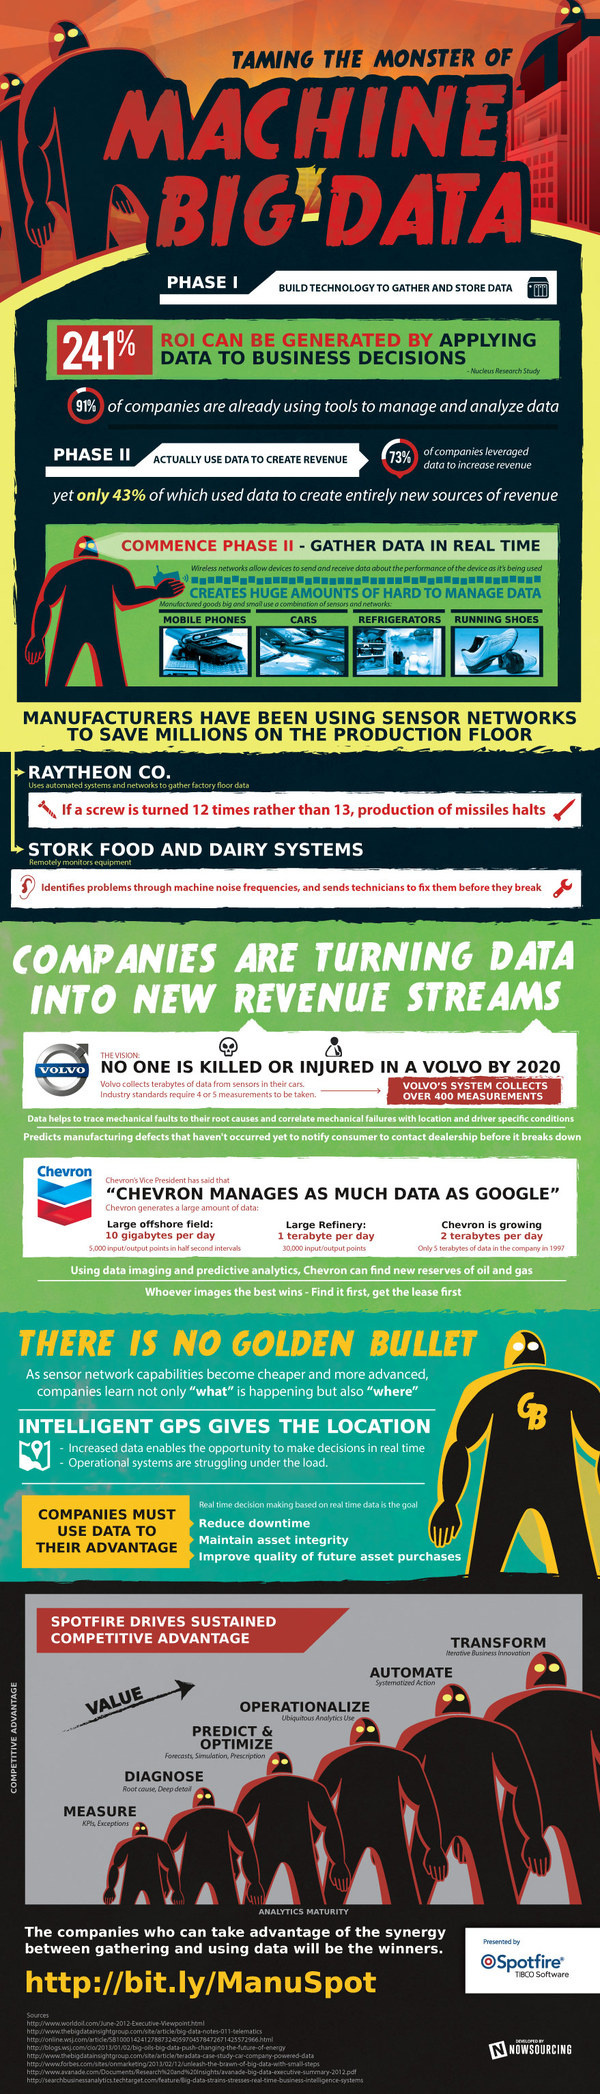 An infographic about taming the monster of machine big data. #big #data #synergy #mining